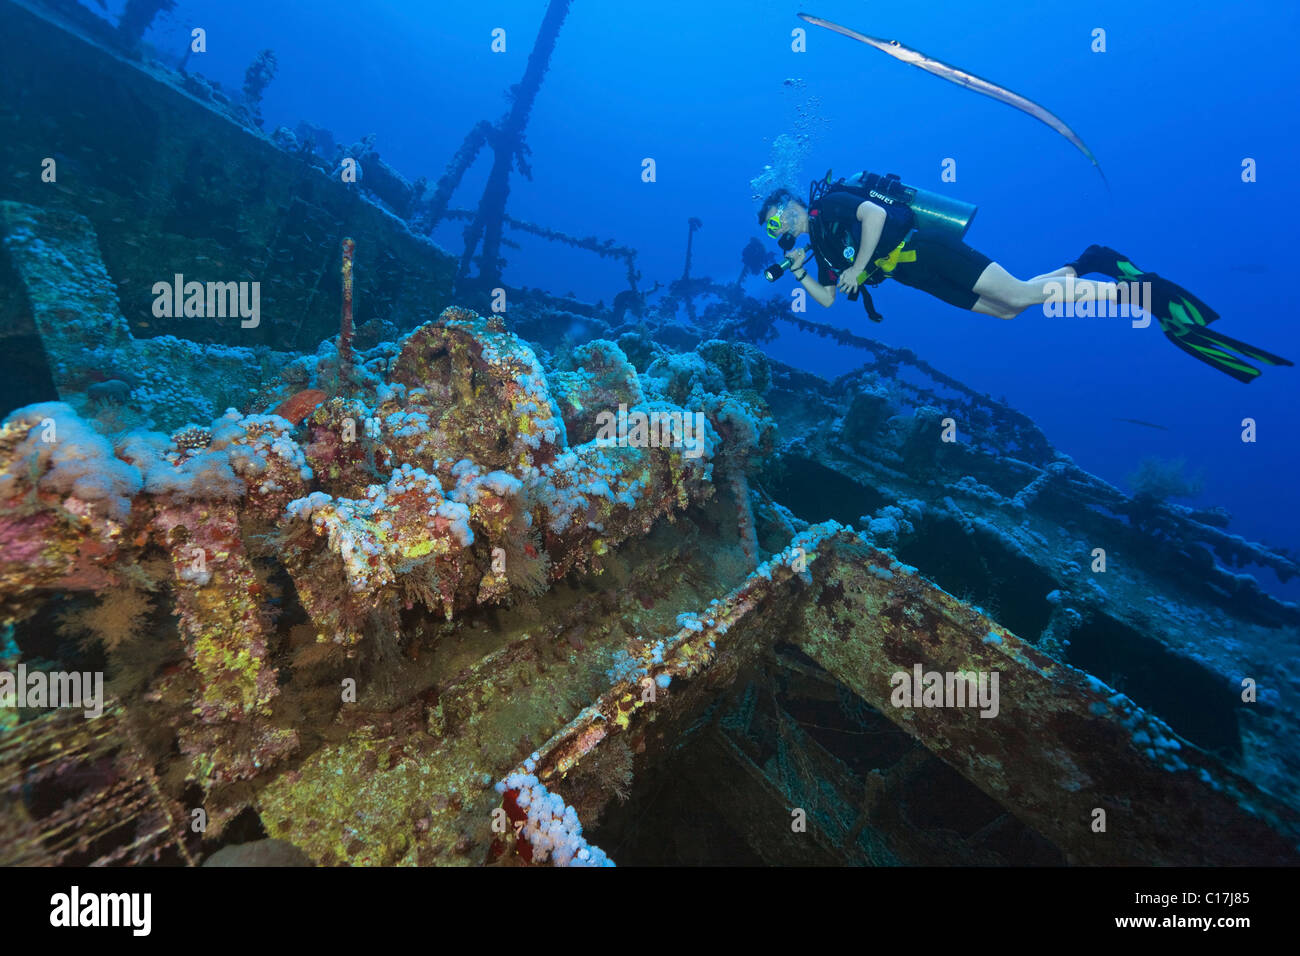 A scuba diver is joined by a Trumpetfish as he shines a torch on the The Aida II shipwreck at Big Brother Island in the Red Sea. Stock Photo